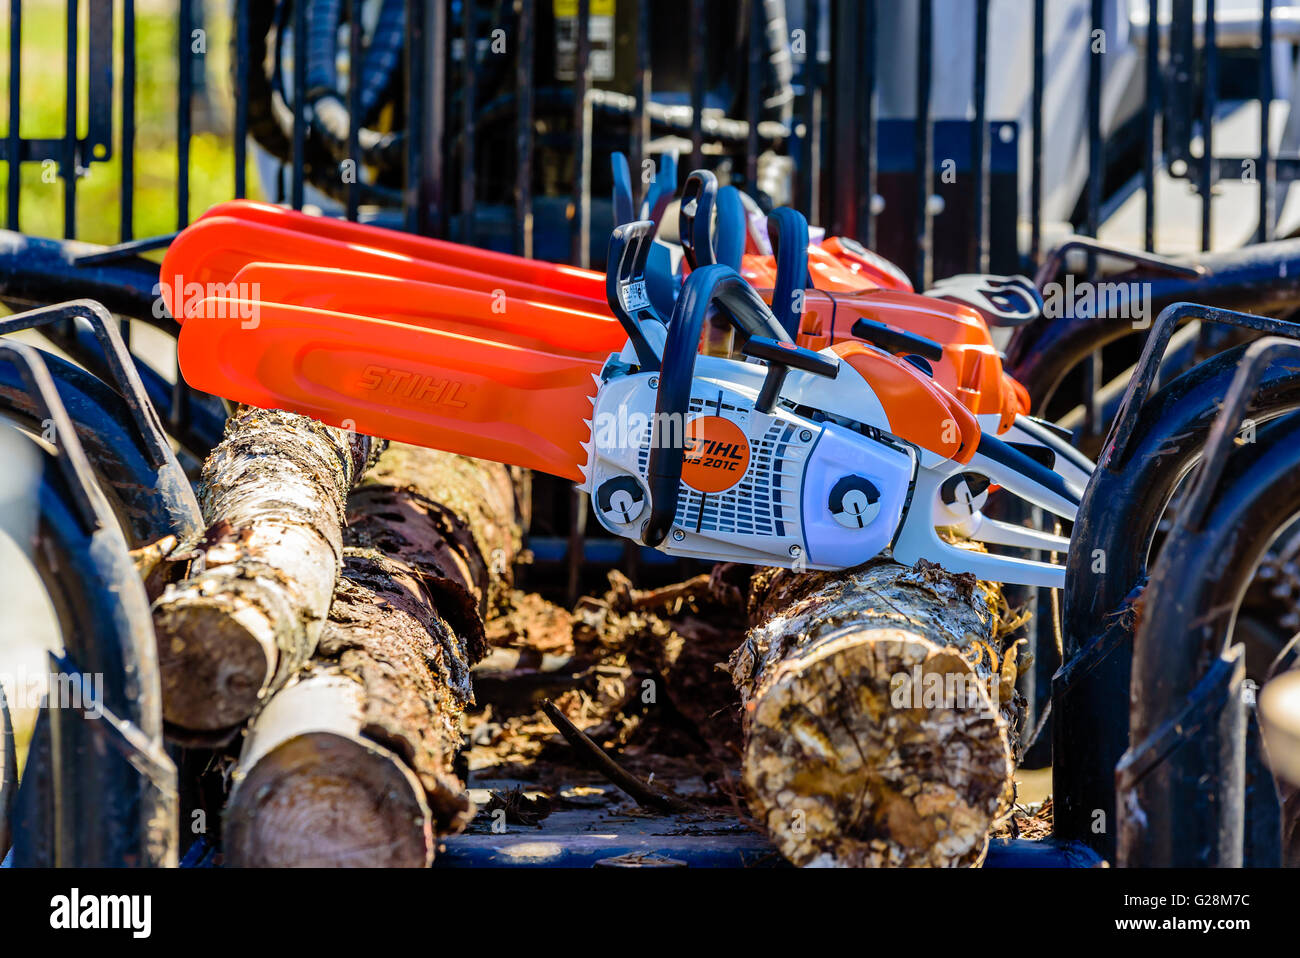 Emmaboda, Sweden - May 13, 2016: Forest and tractor (Skog och traktor) fair. Stihl MS 201c chainsaw on wooden logs Stock Photo